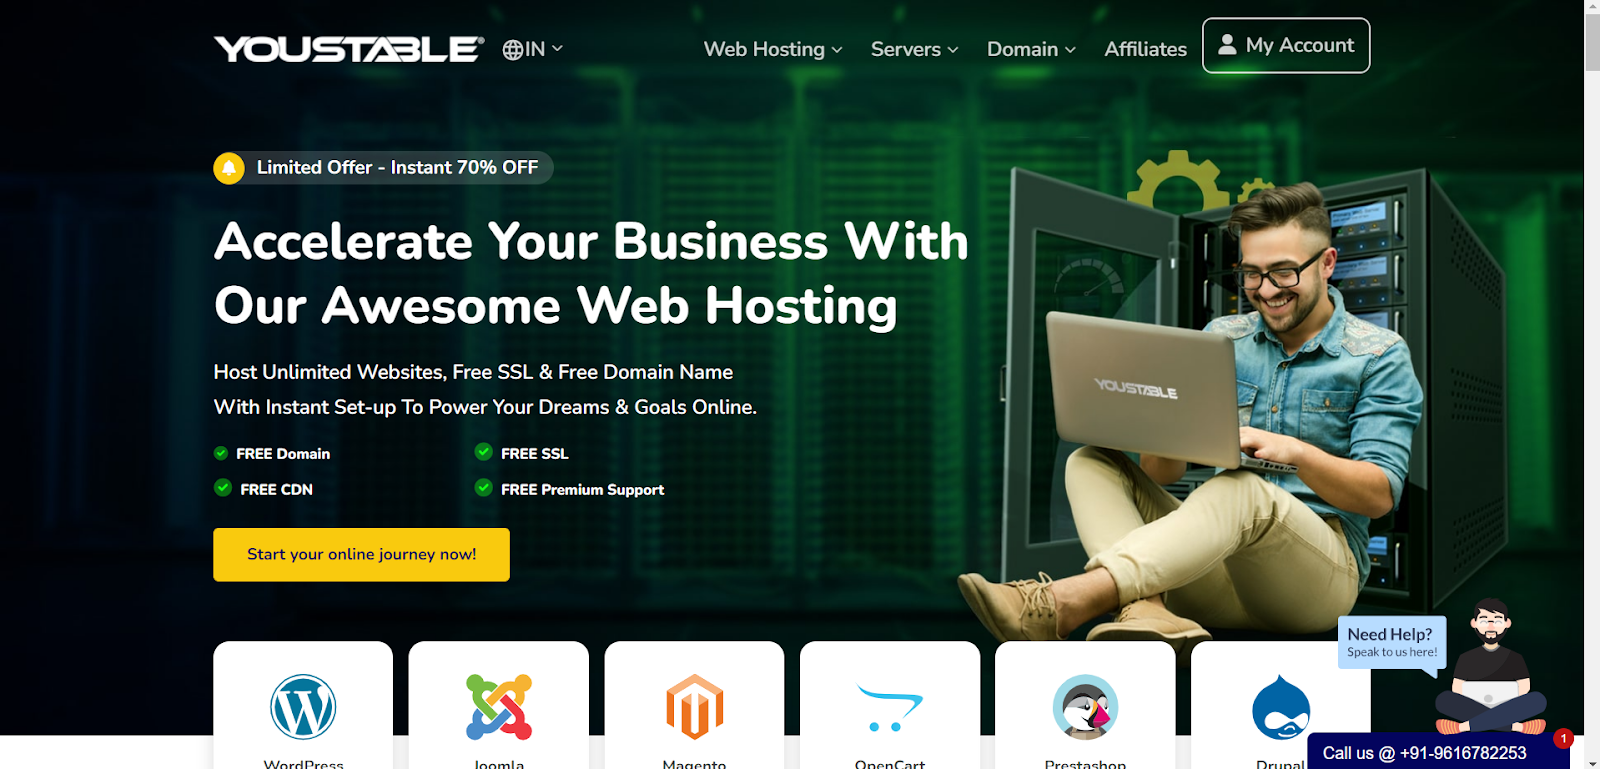 youstable cPanel 